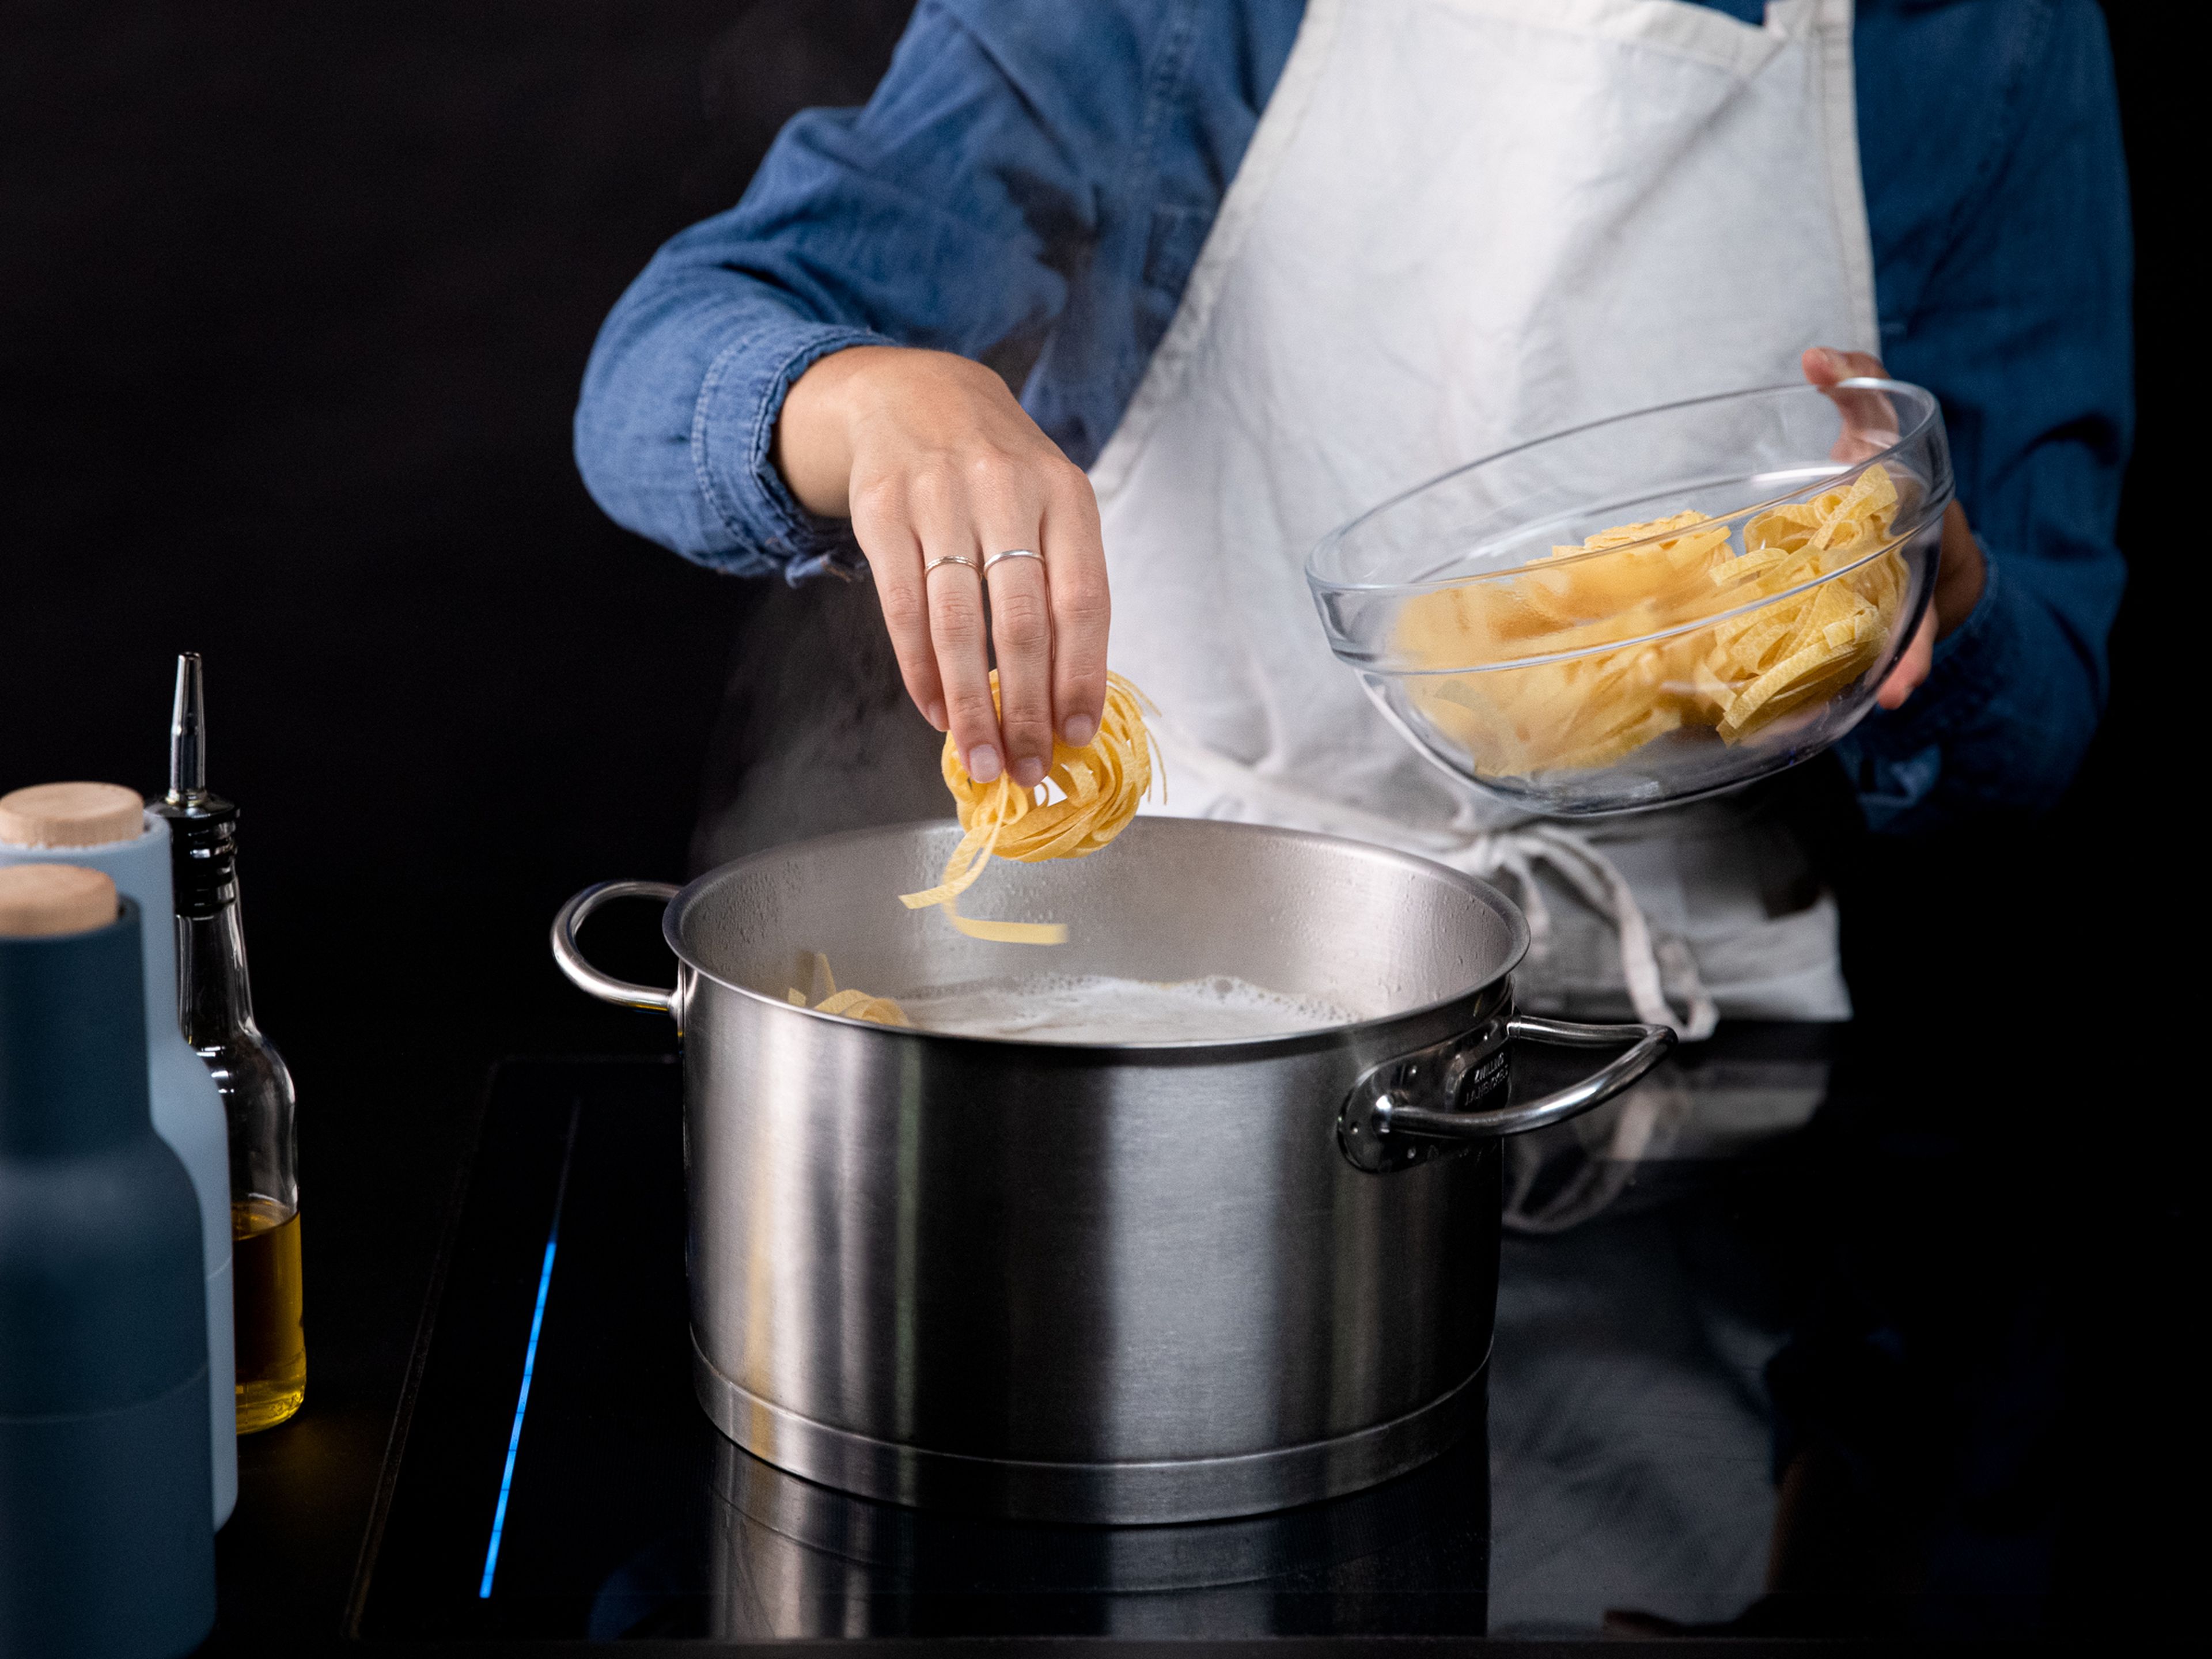 Bring a large pot of water to boil, season generously with salt, and cook tagliatelle according to the package instructions. Drain, reserving some pasta water.